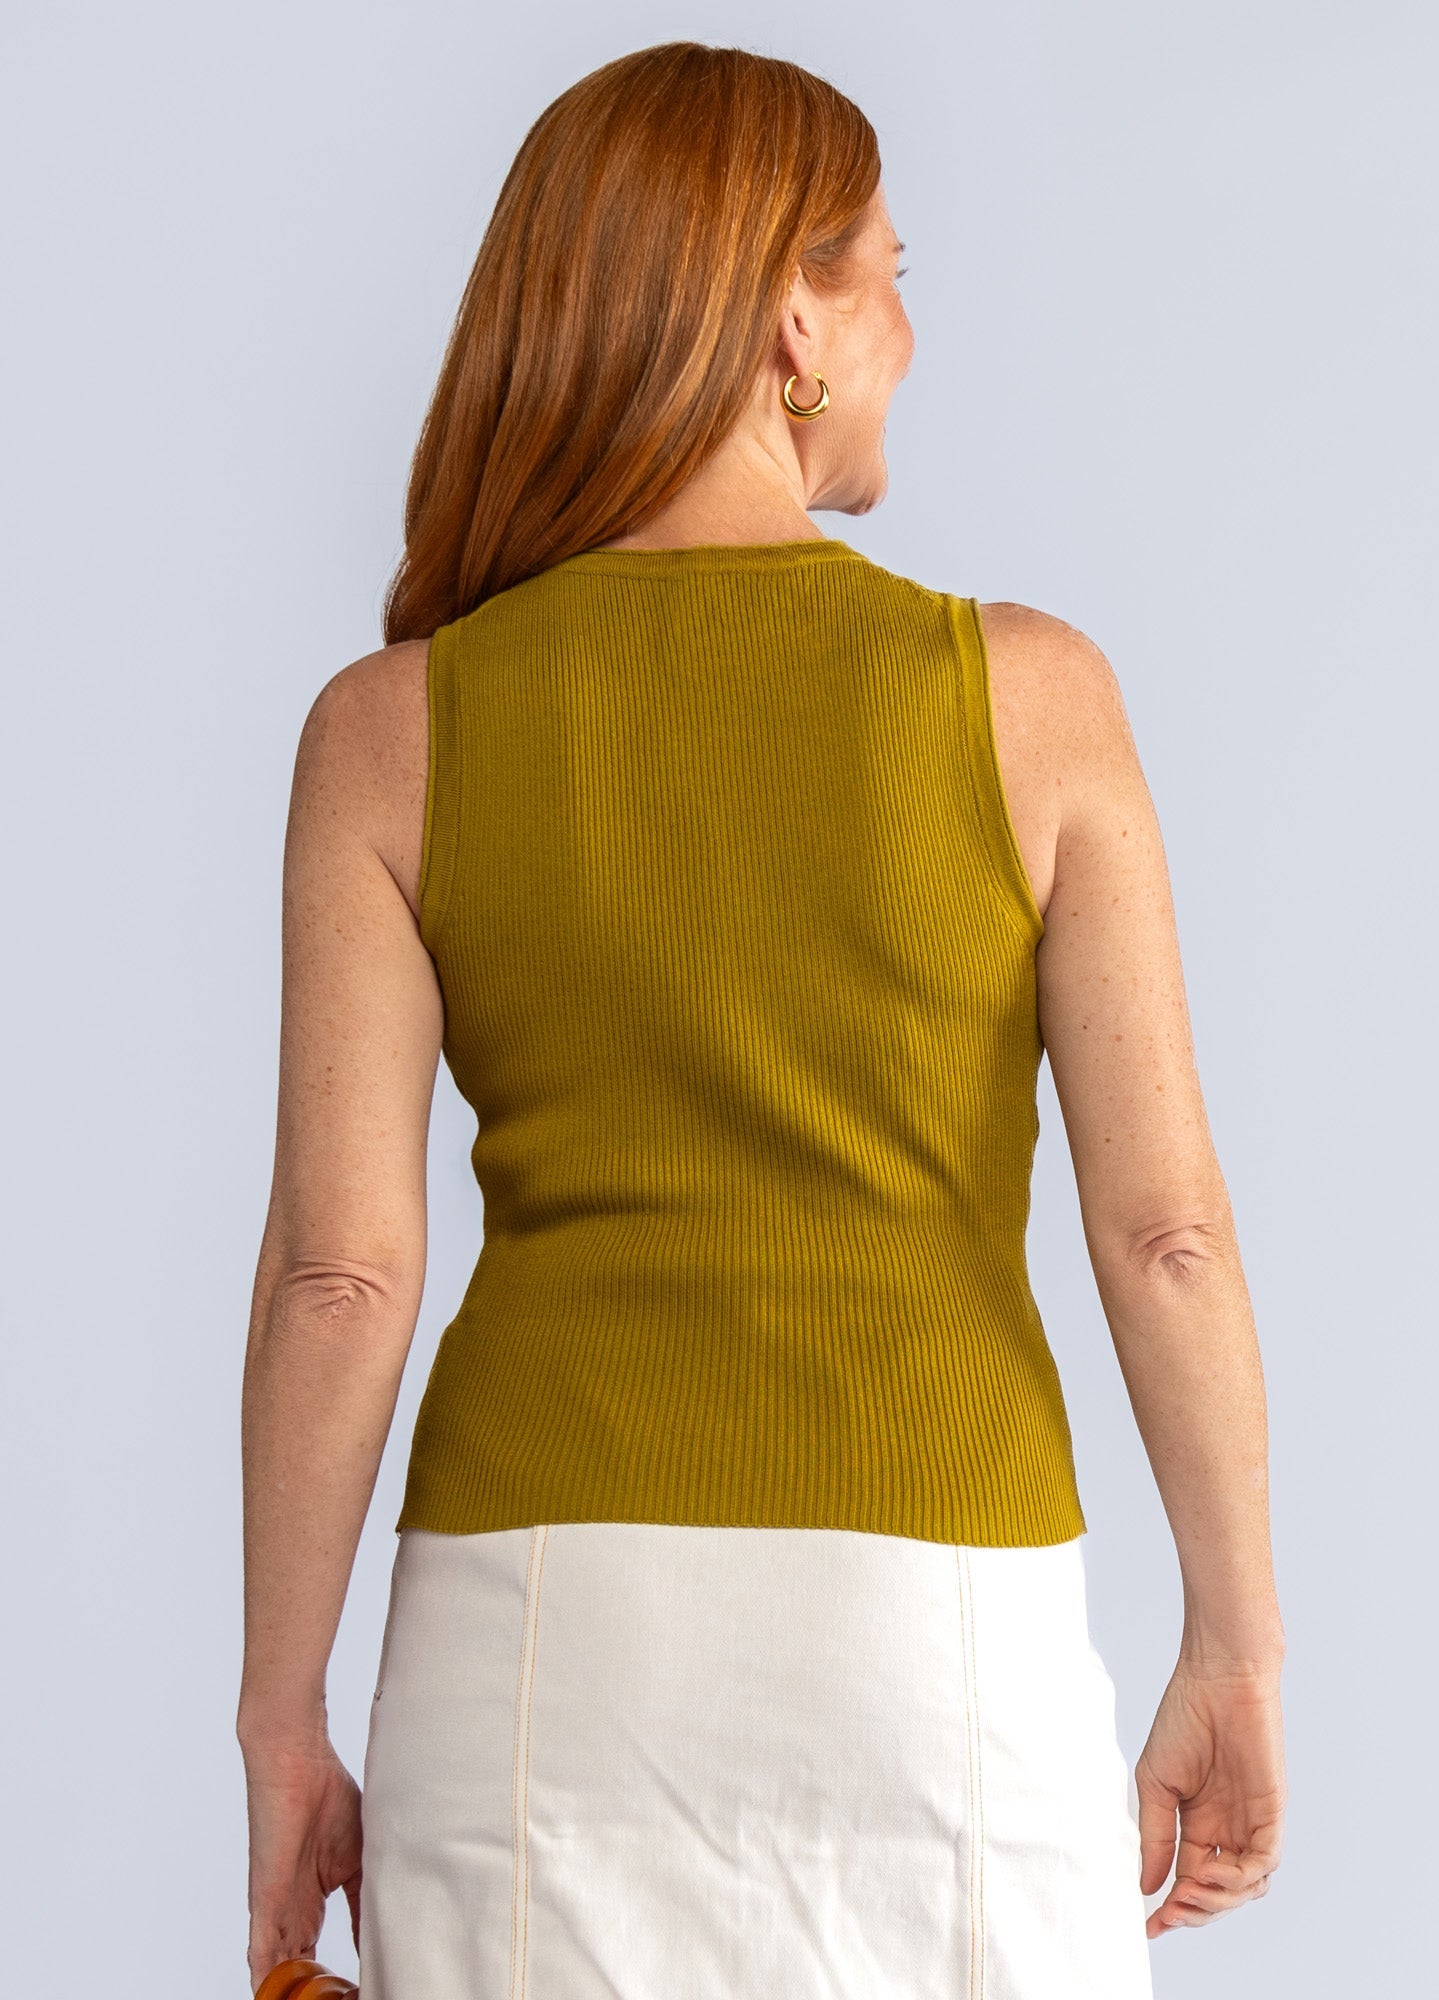 EVE top Moss Green - Lesley Evers-Best Seller-Shop-Shop/All Products